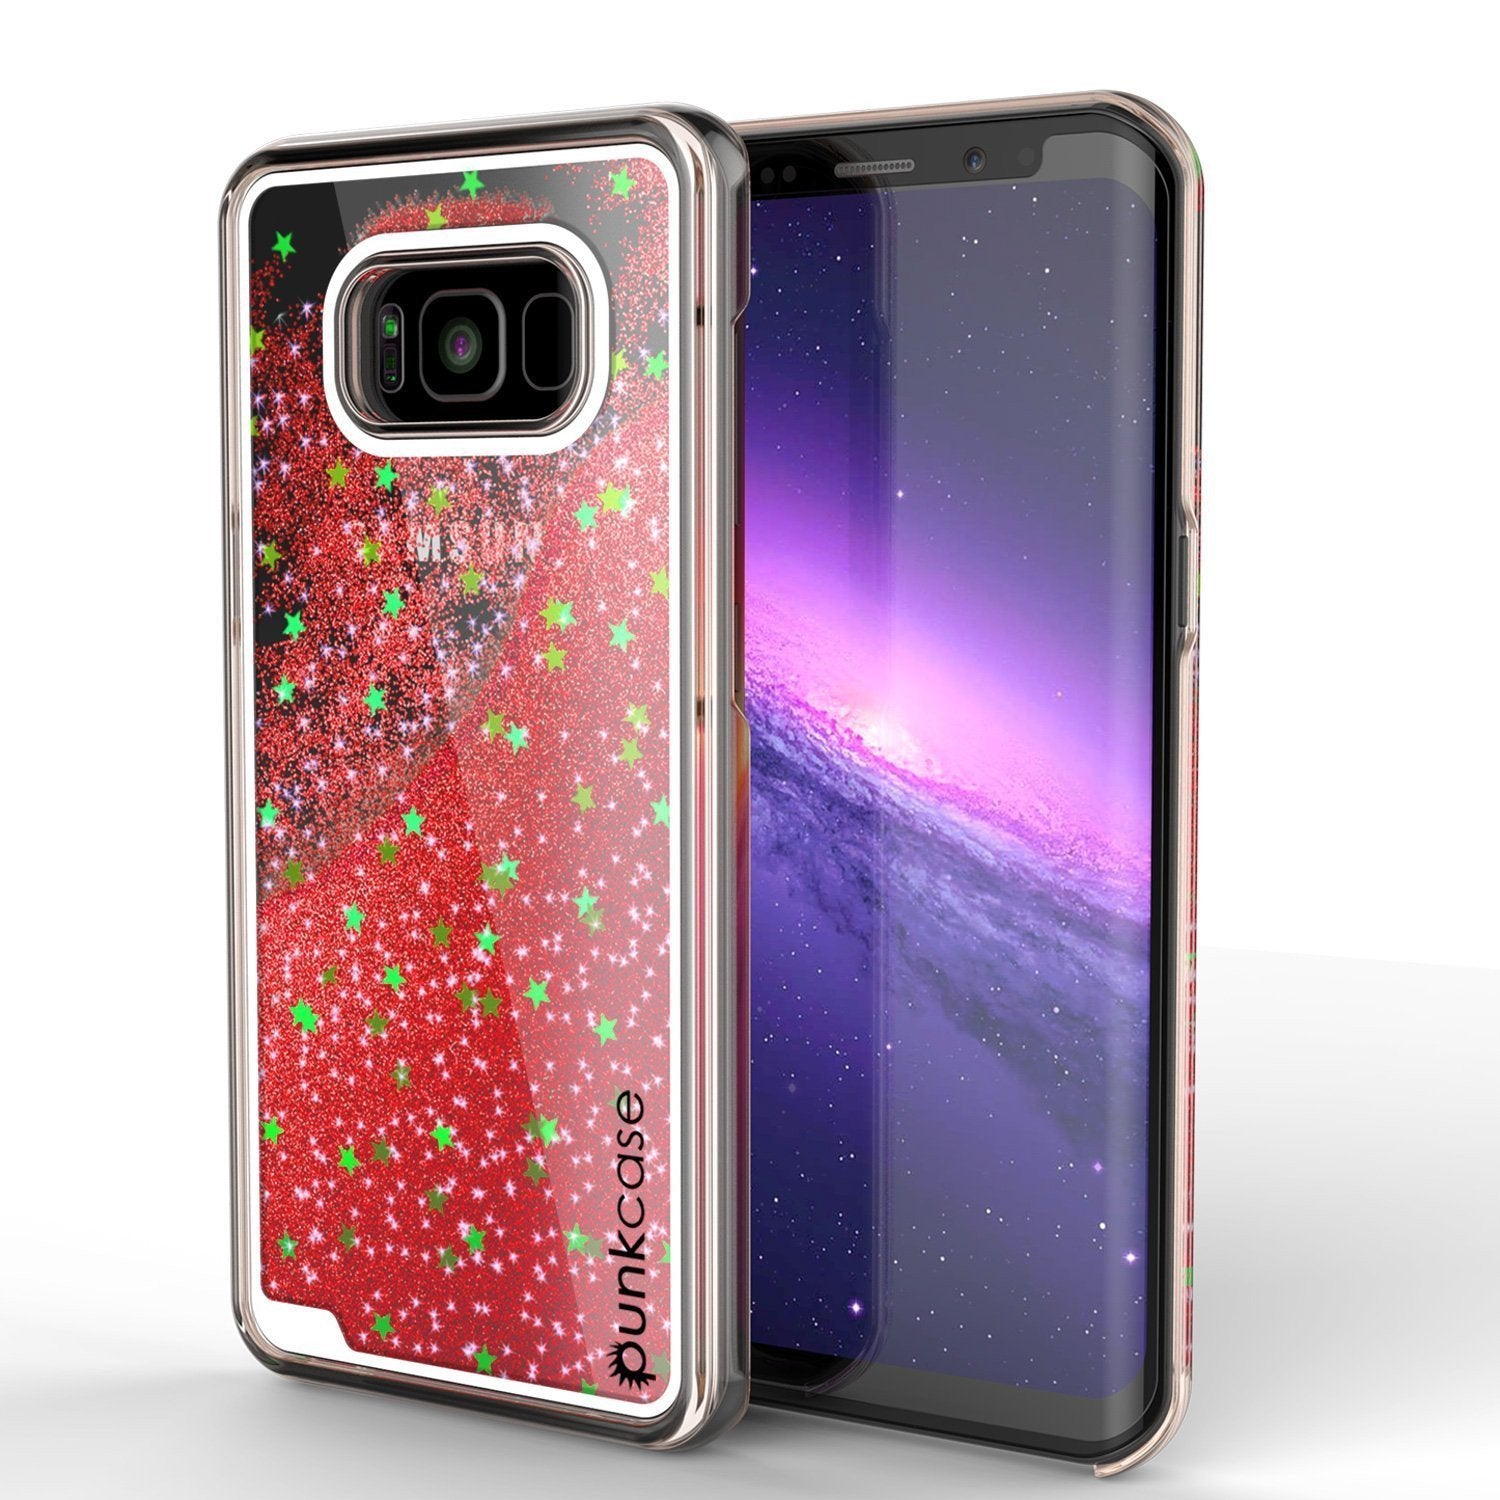 Galaxy S8 Case, Punkcase [Liquid Series] Protective Dual Layer Floating Glitter Cover with lots of Bling & Sparkle + PunkShield Screen Protector for Samsung S8 [Red]